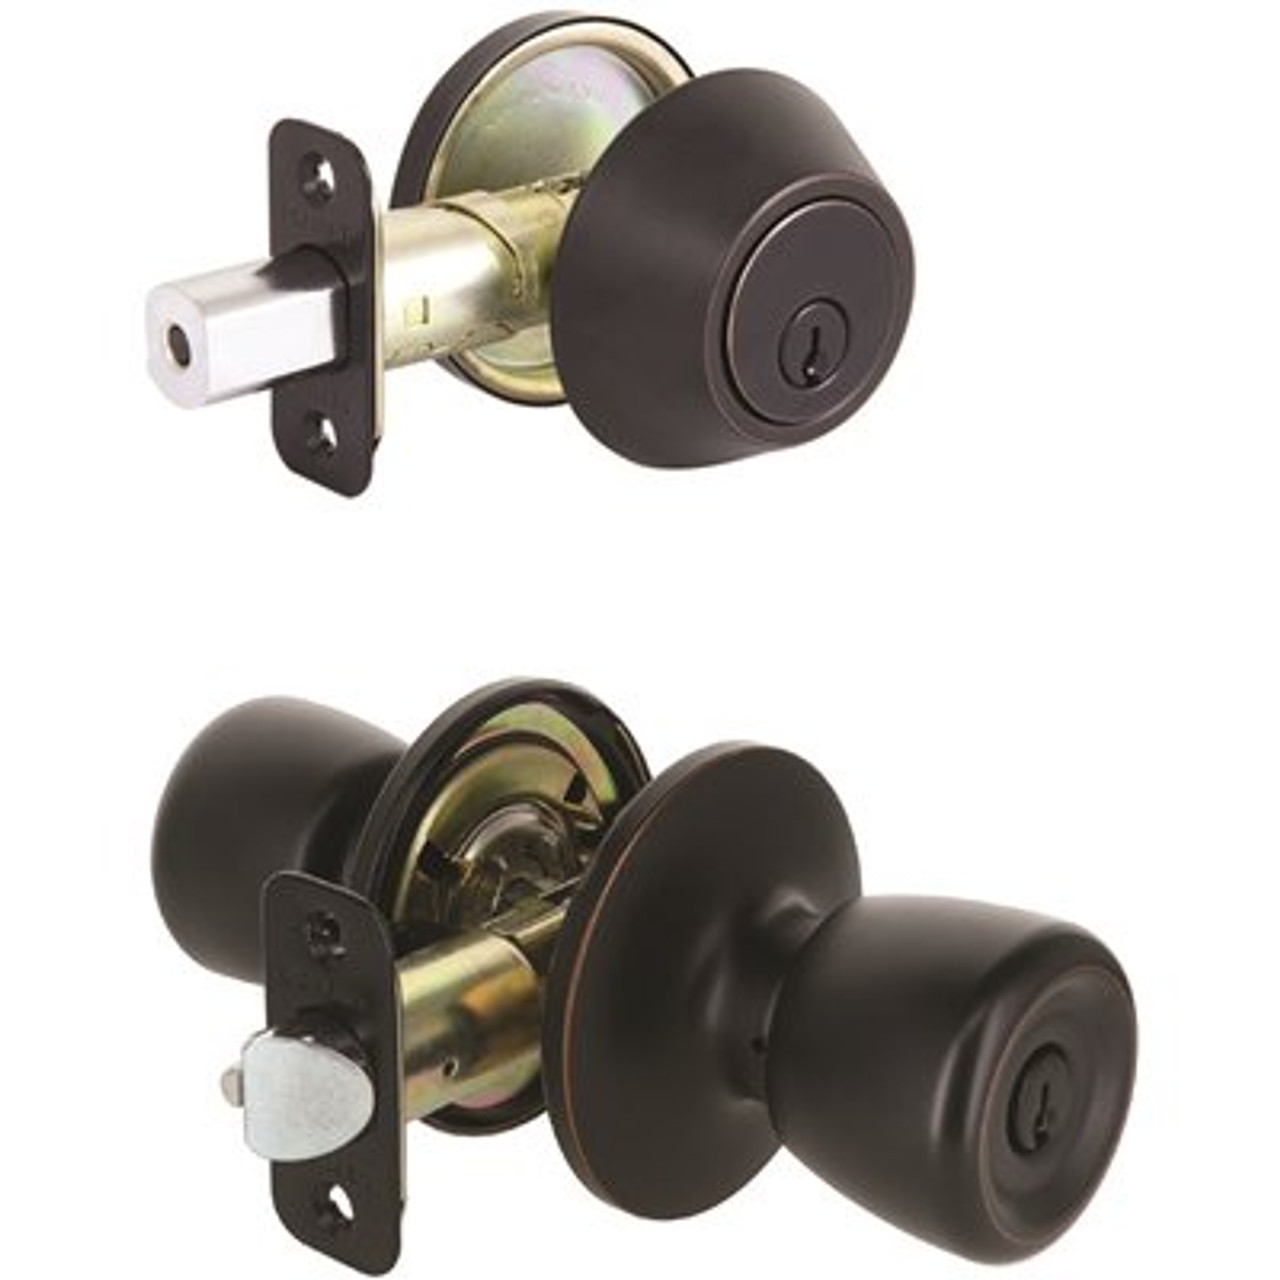 Defiant Waterbury Aged Bronze Keyed Entry Door Knob And Single Cylinder Deadbolt Combo Pack With Kw1 Keyway Keyed Differently